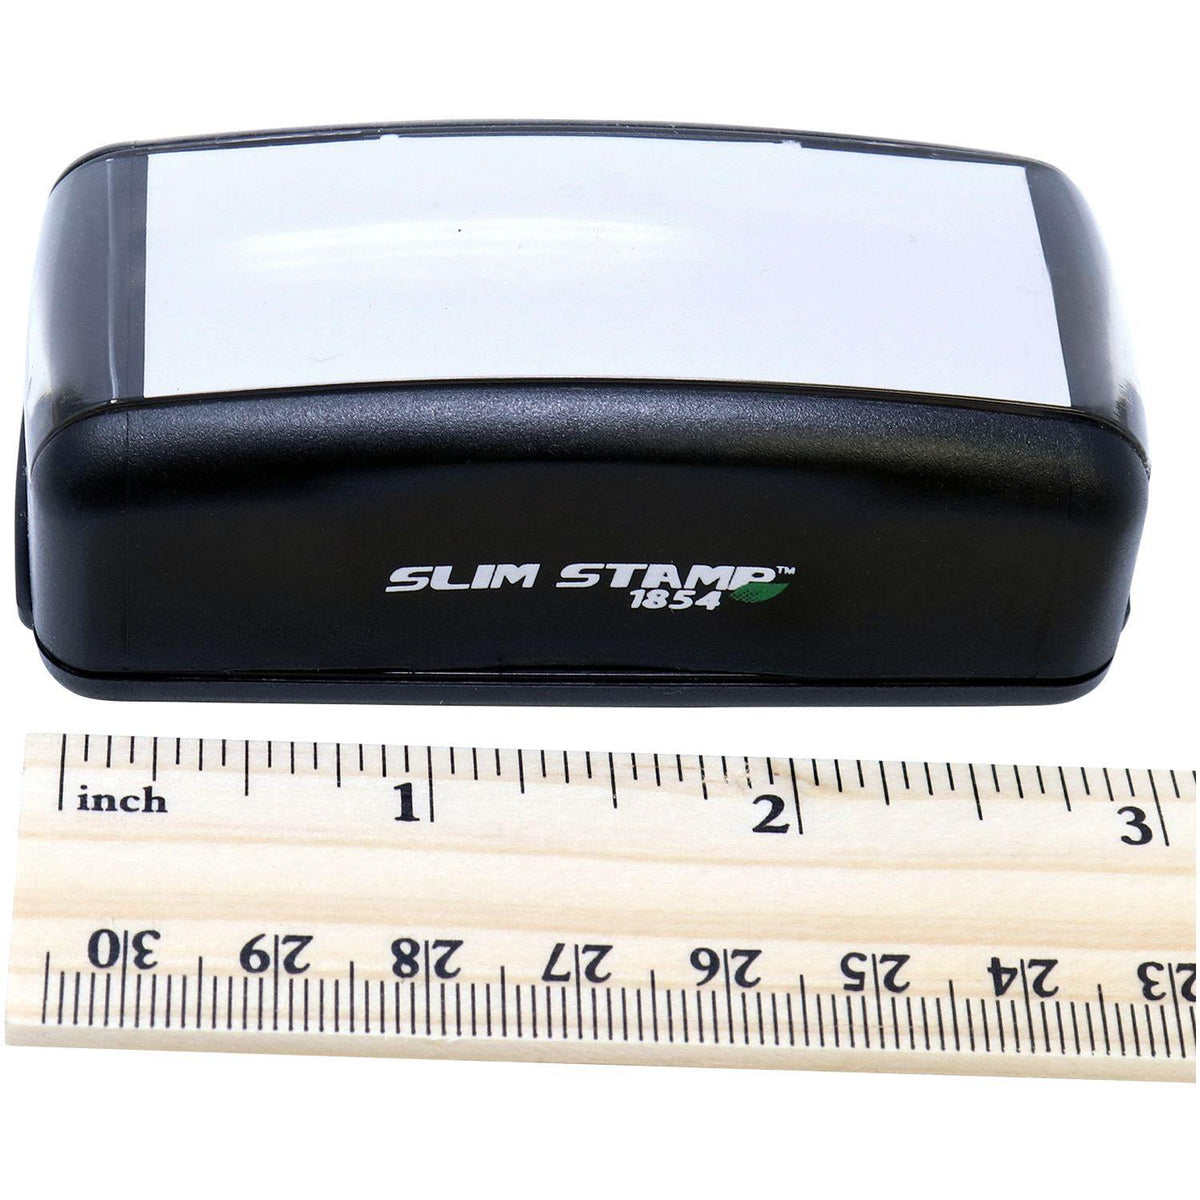 Measurement Large Pre-Inked Narrow Expedite Stamp with Ruler